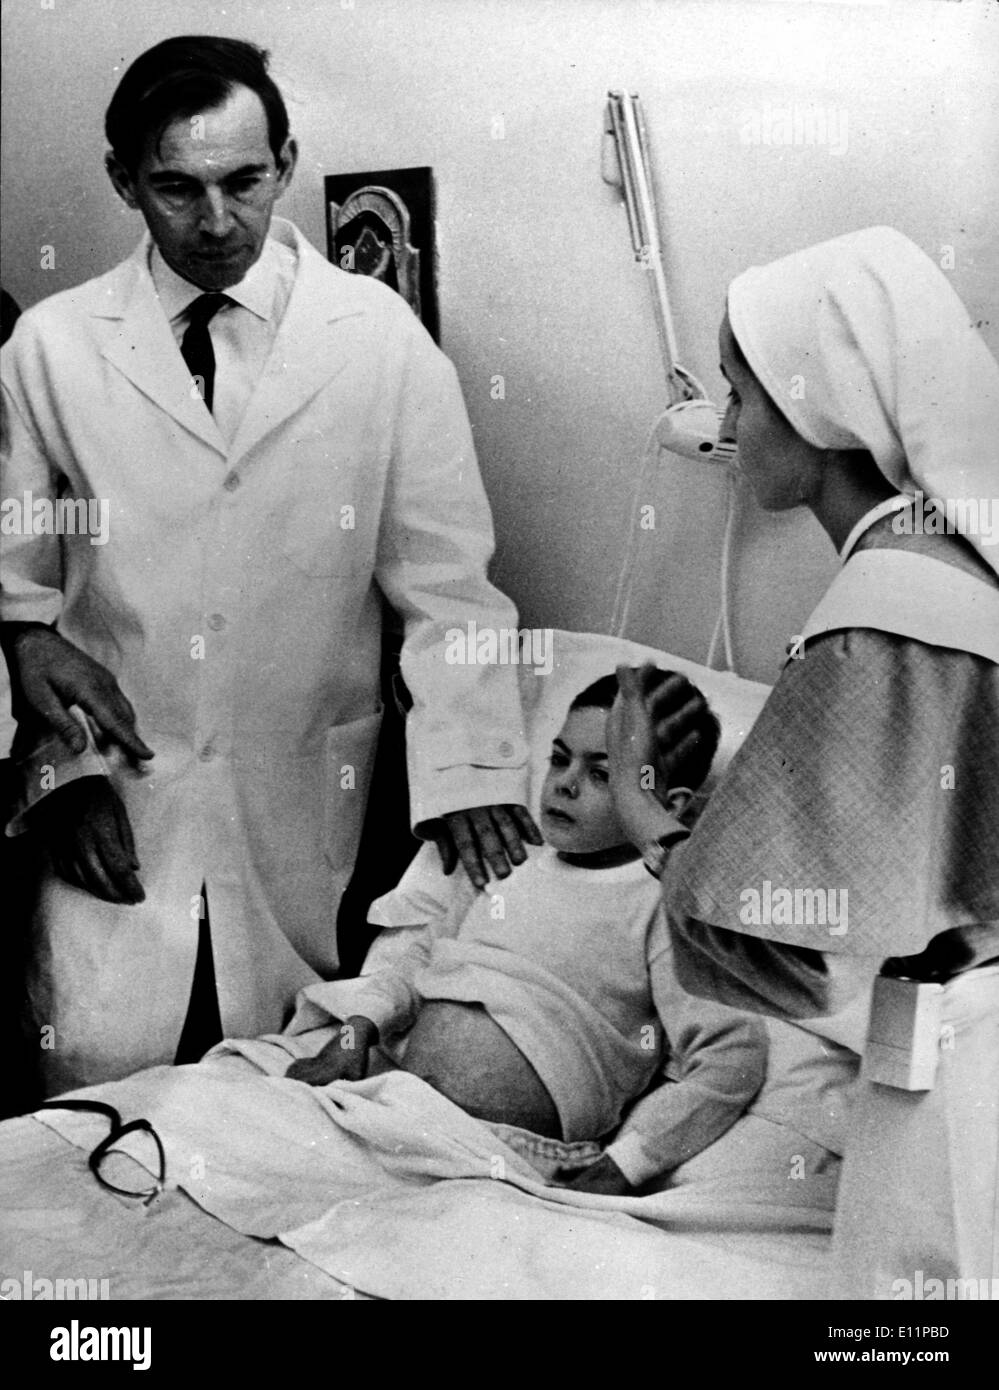 May 18, 1979; Rome, Italy; Hearth surgeon CHRISTIAN BARNARD came in Rome to examine some children hearth sufferer at the request of Italian actress Sophia Loren, who met the children, cried with their parents and wrote to Barnard appealing to him help. The picture shows prof. CHRIS BARNARD visiting the child PAOLO FIOCCA who suffered for the 'blue blood', at the Moscati Clinis today, immediately after his arrival in Rome. Stock Photo